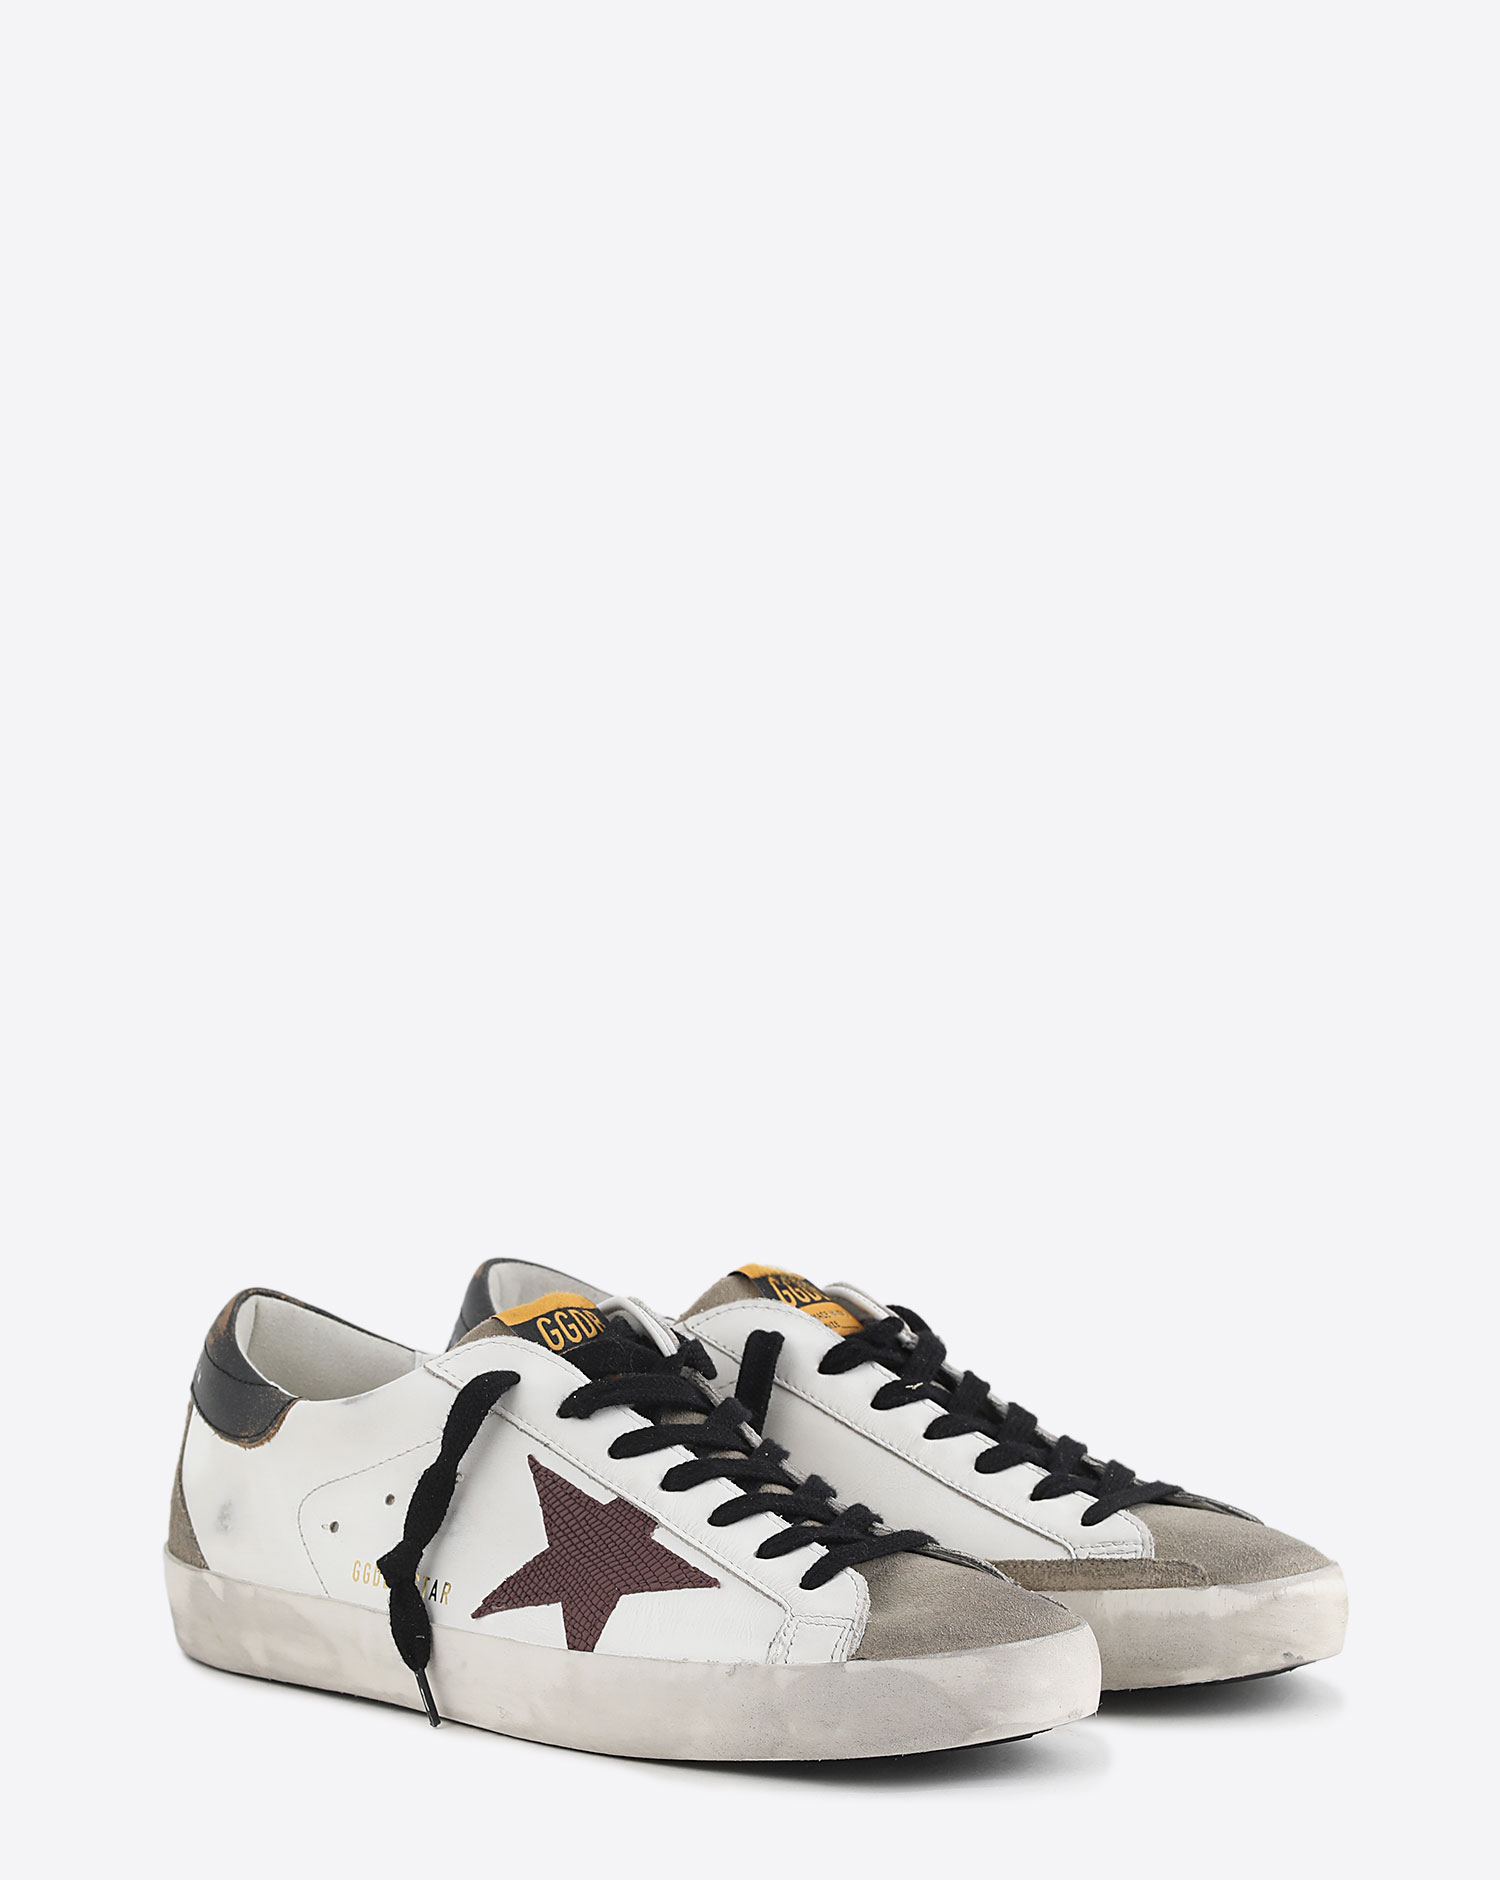 Sneakers Super-Star White Taupe Bordeaux 11394 Golden Goose 